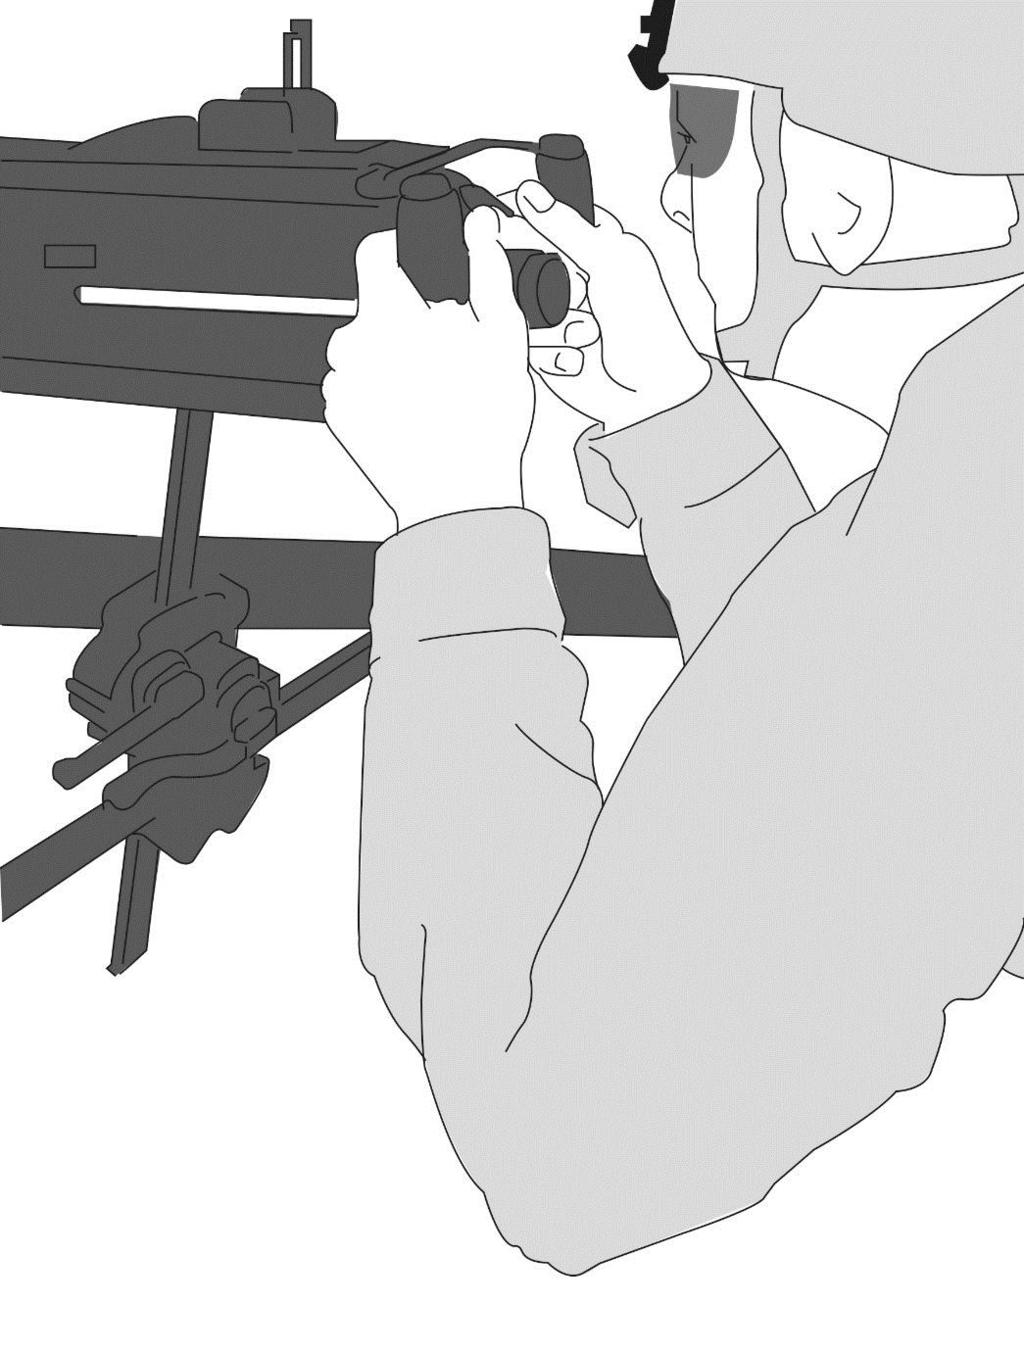 Chapter 6 Figure 6-4. Prone position firing two handed Firing Hand 6-8. Proper placement of the firing hand will aid in trigger control, recoil management, and stability.